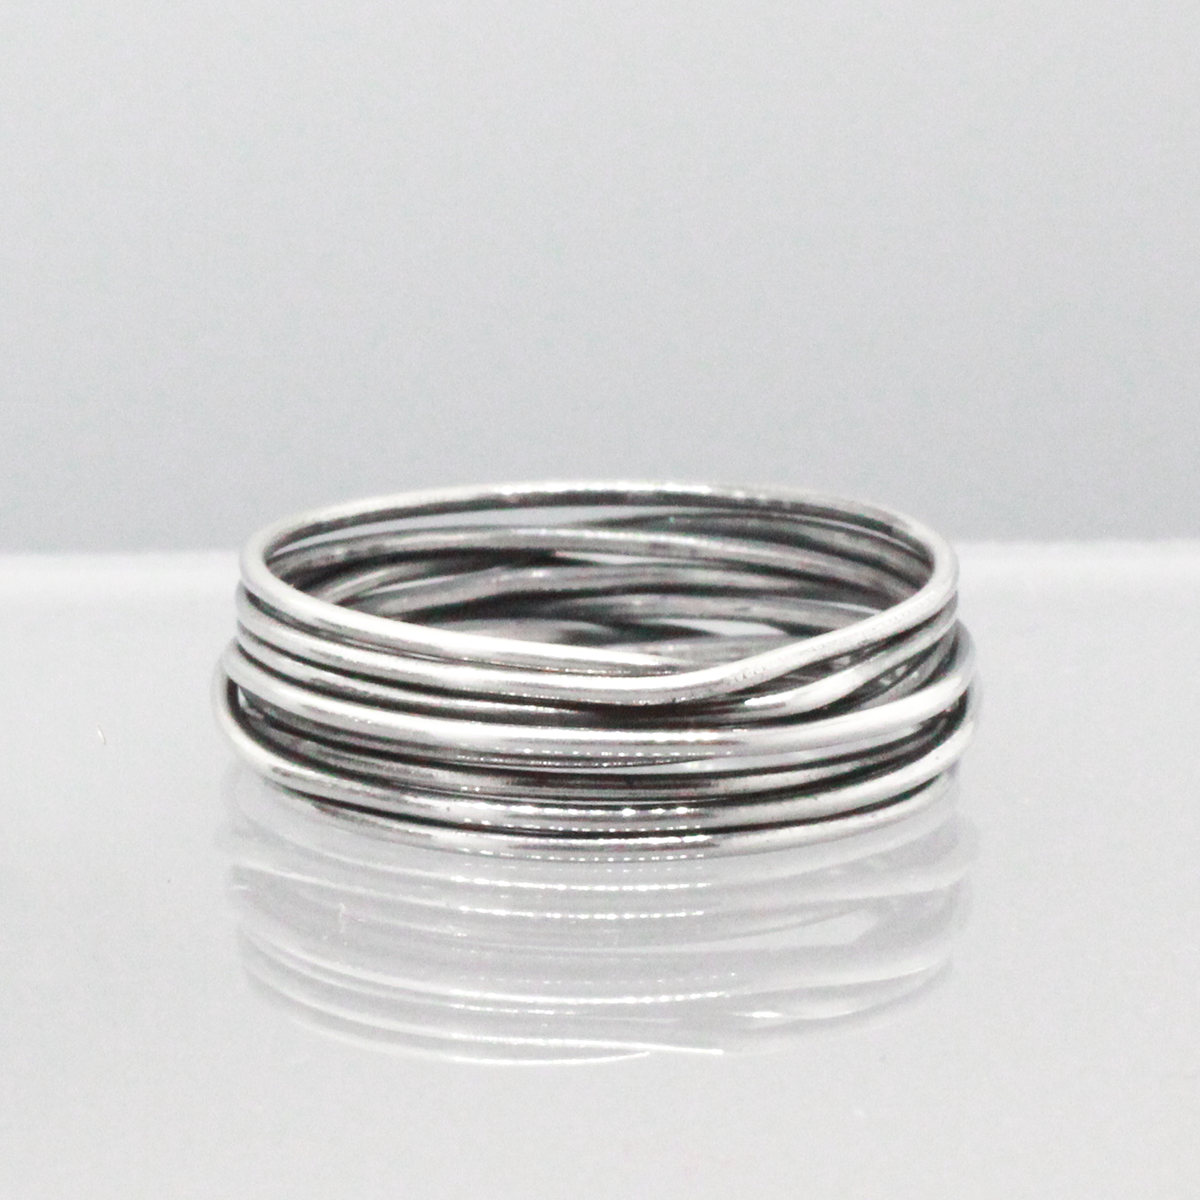 Aran - Lasso S Oxidised Silver Ring. Inspired by lasso rope designs, this piece offers a unique twist to your style.  Crafted with oxidized sterling silver and featuring a comfortable 6mm band width, it's perfect for wearing solo or stacking with other rings to make a statement.